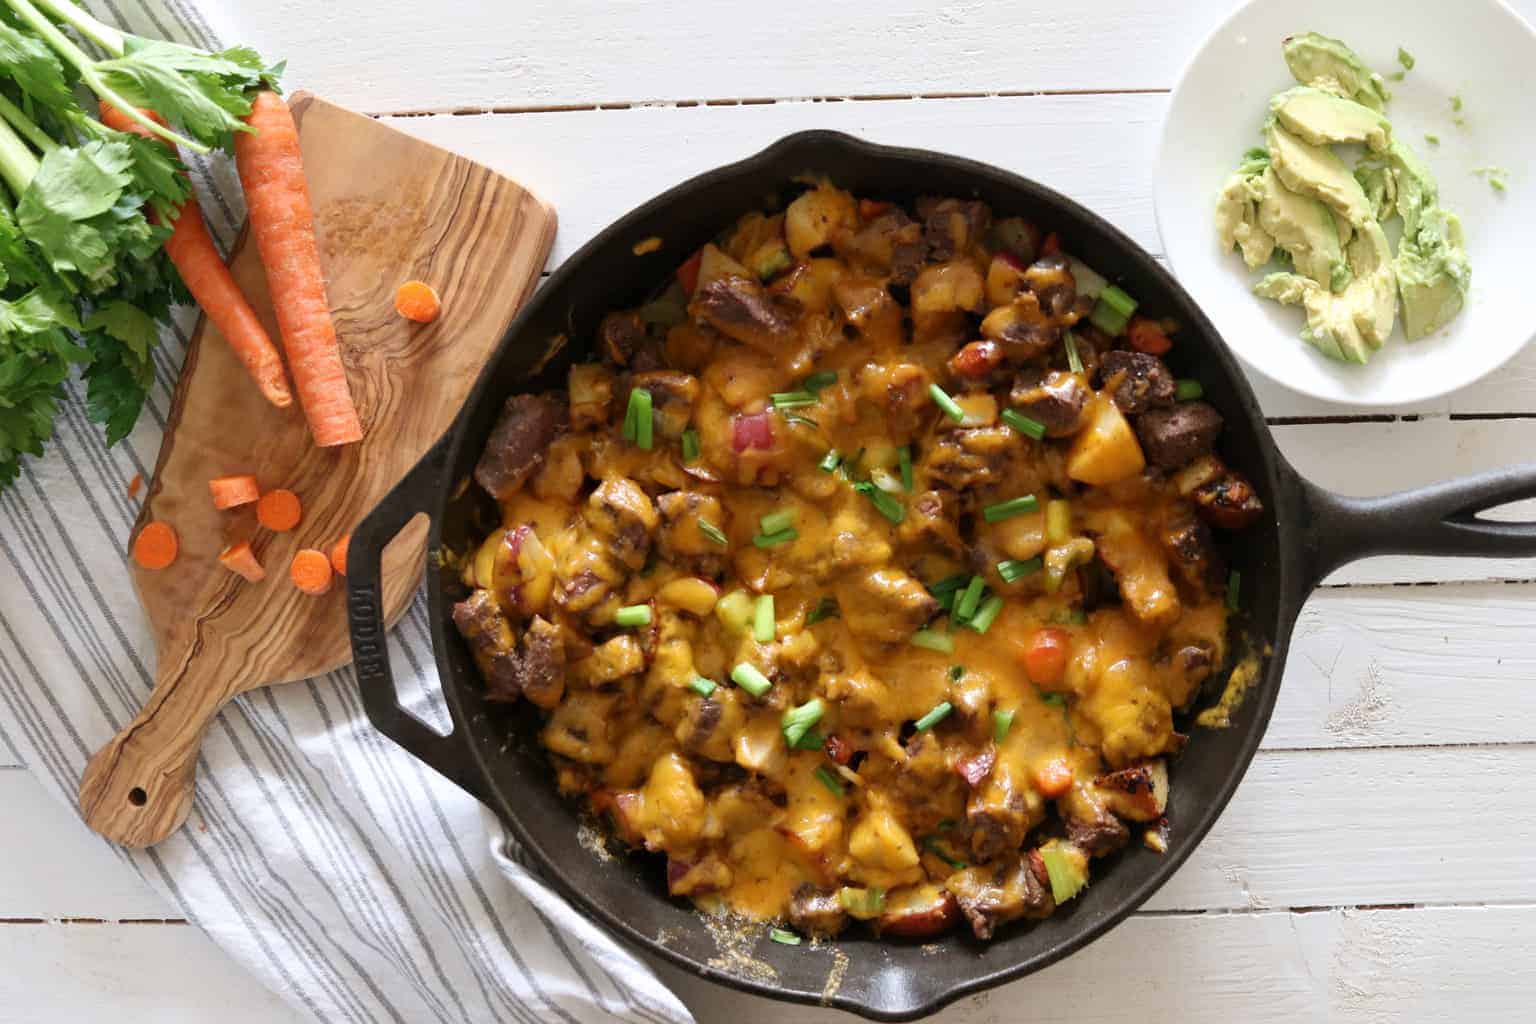 Steak and potato skillet melt with avocados, carrots, and green onions.